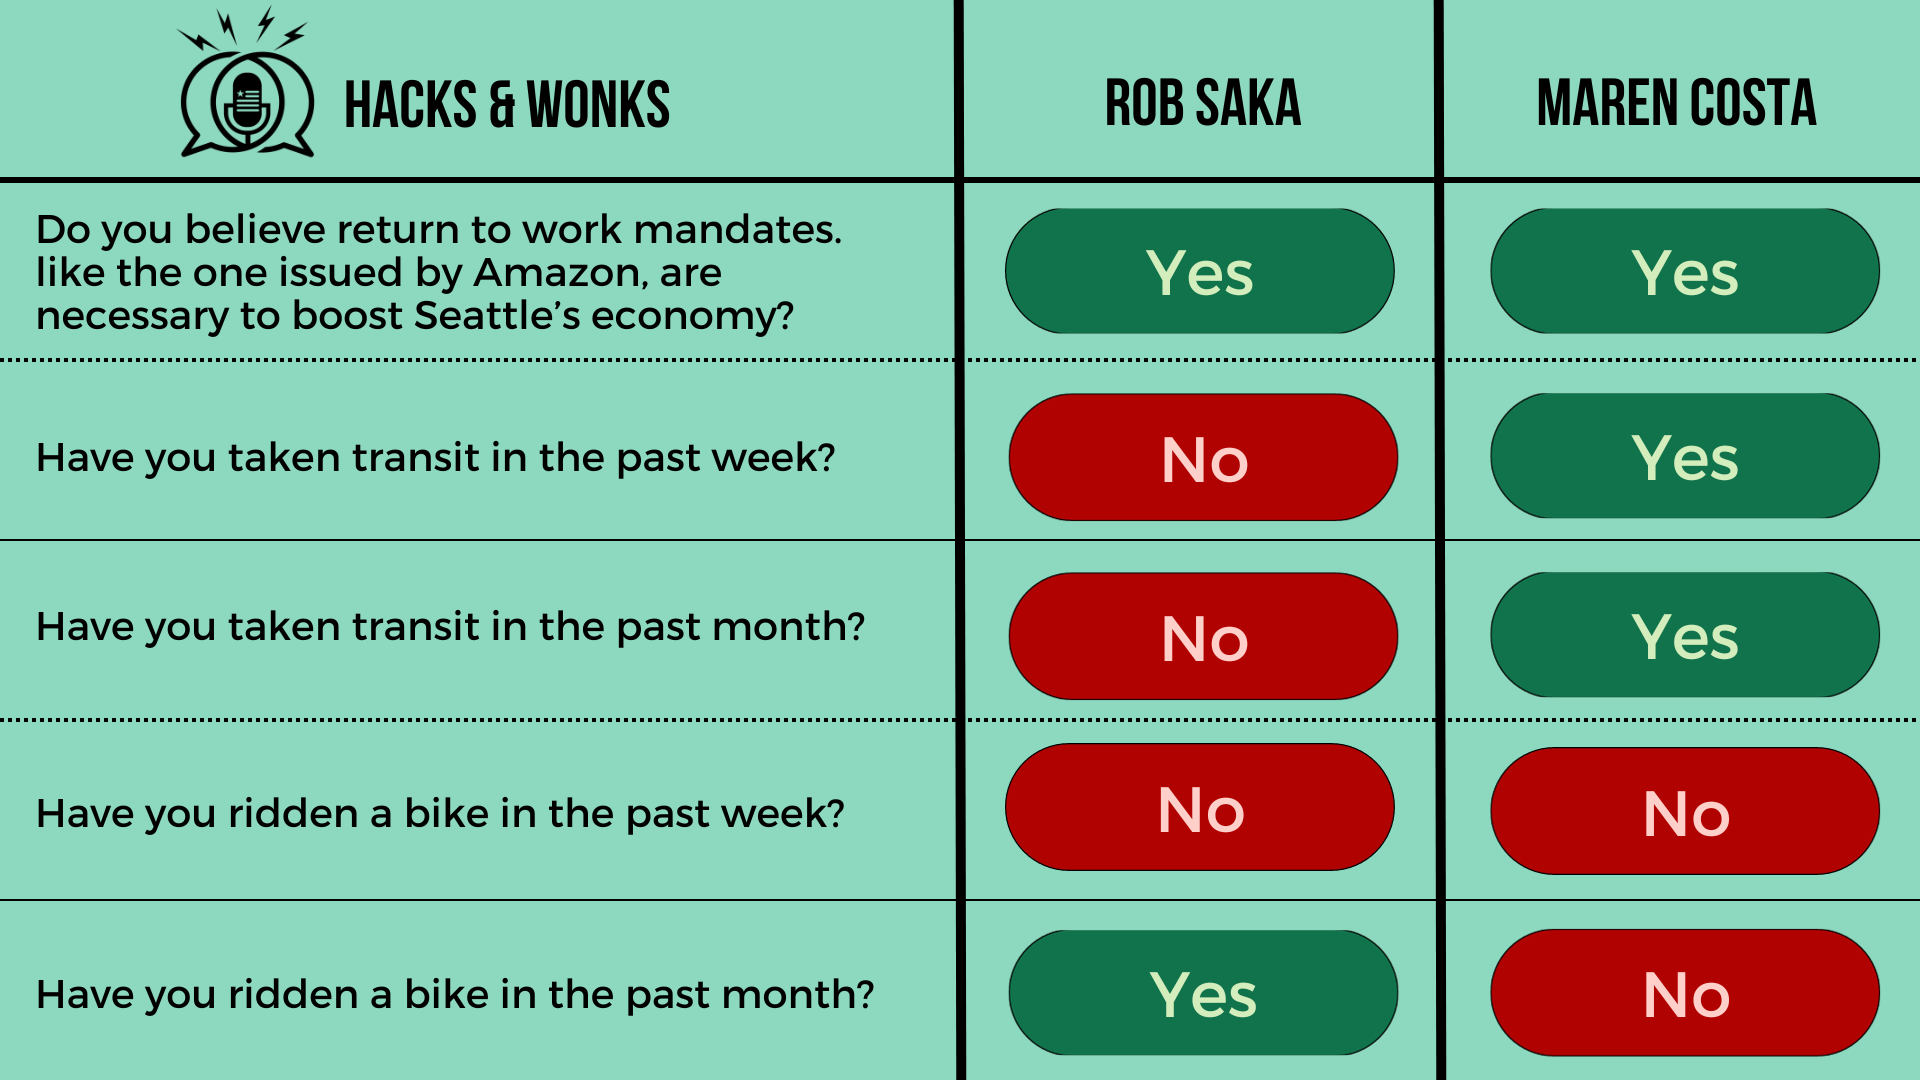 Q: Do you believe return to work mandates. like the one issued by Amazon, are necessary to boost Seattle’s economy? Rob Saka: Yes, Maren Costa: Yes  Q: Have you taken transit in the past week? Rob Saka: No, Maren Costa: Yes  Q: Have you taken transit